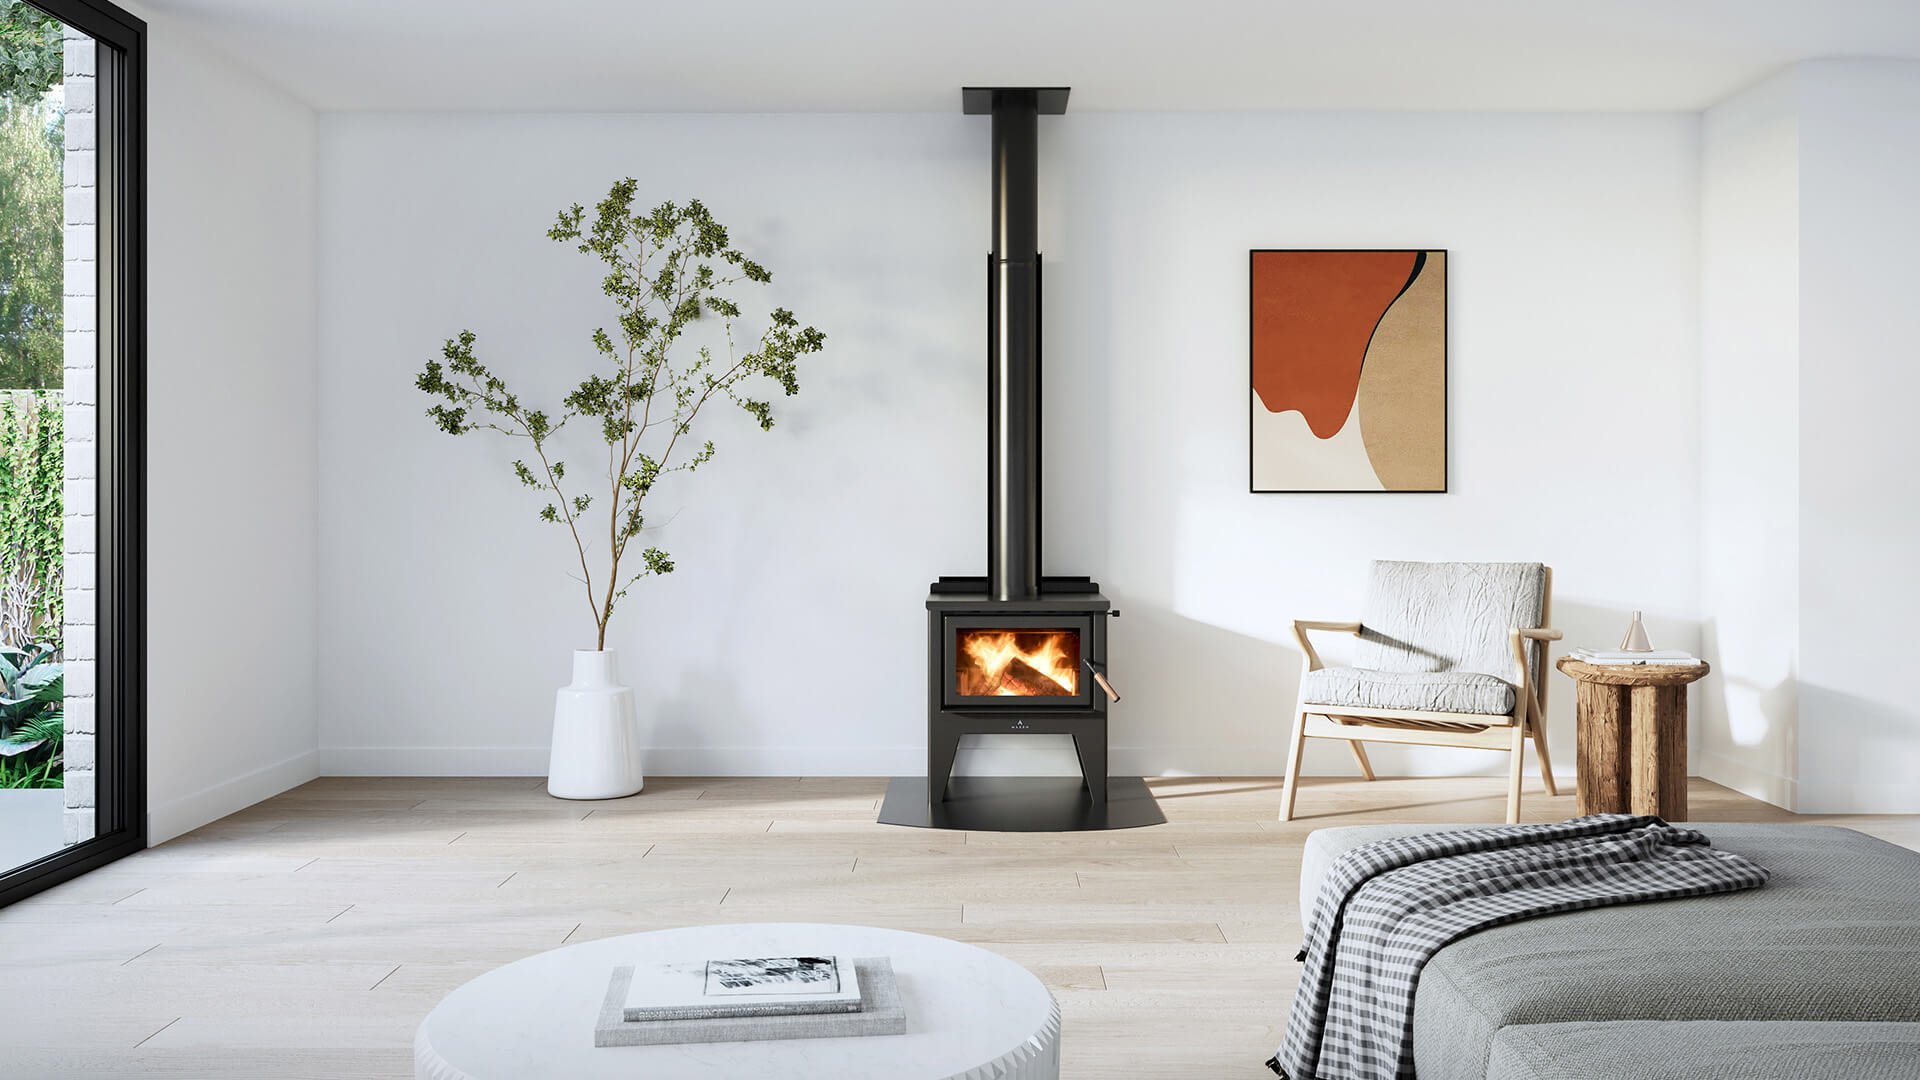 Maxen Kinmont 350 with Leg Base Wood Fireplace white living room